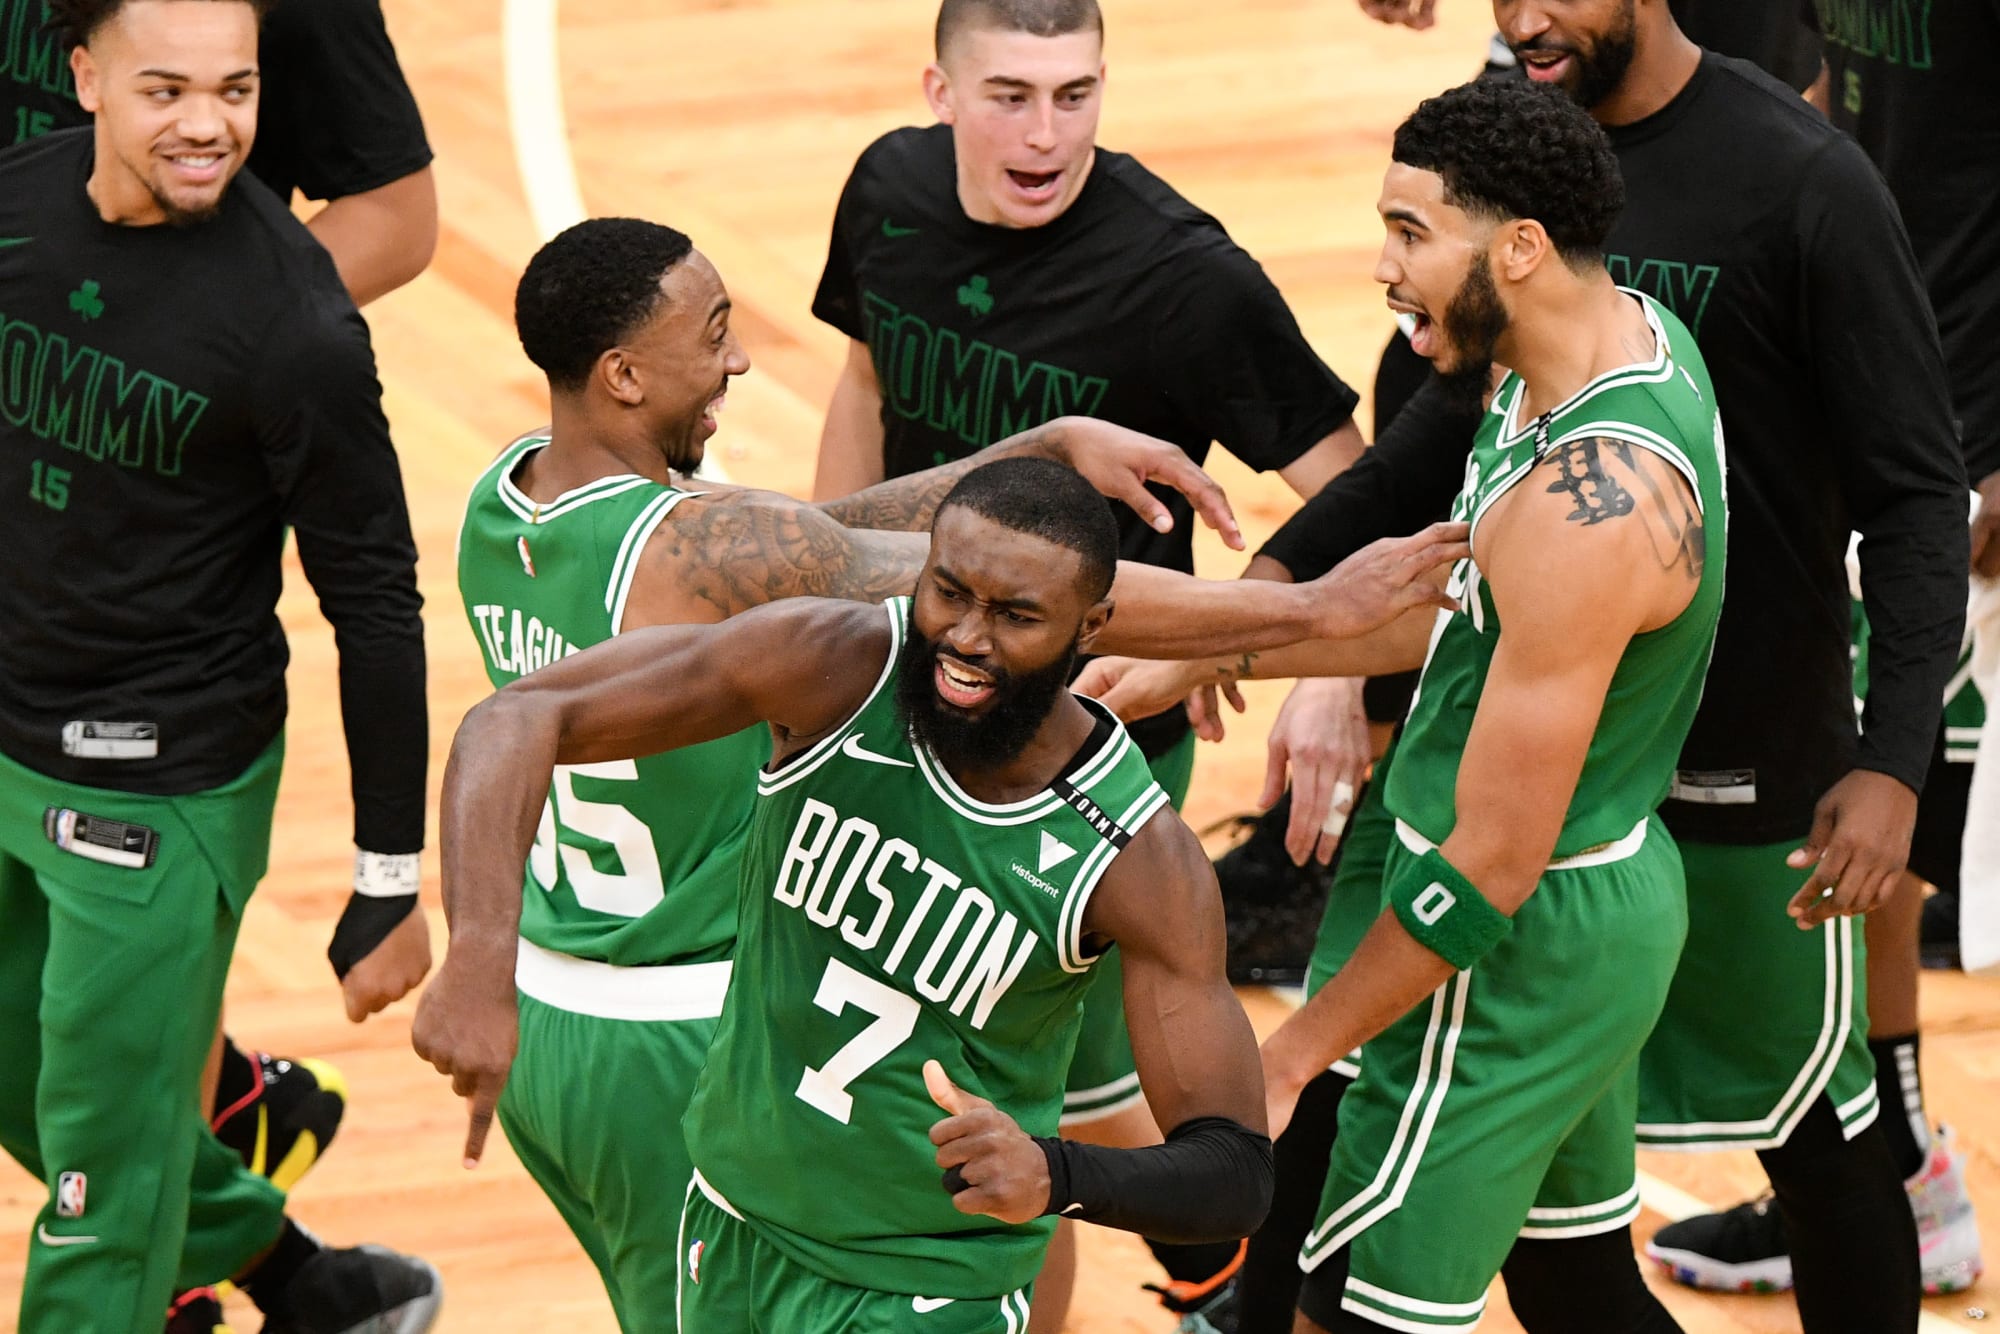 Boston Celtics The C's top 3 performers in first quarter of the season